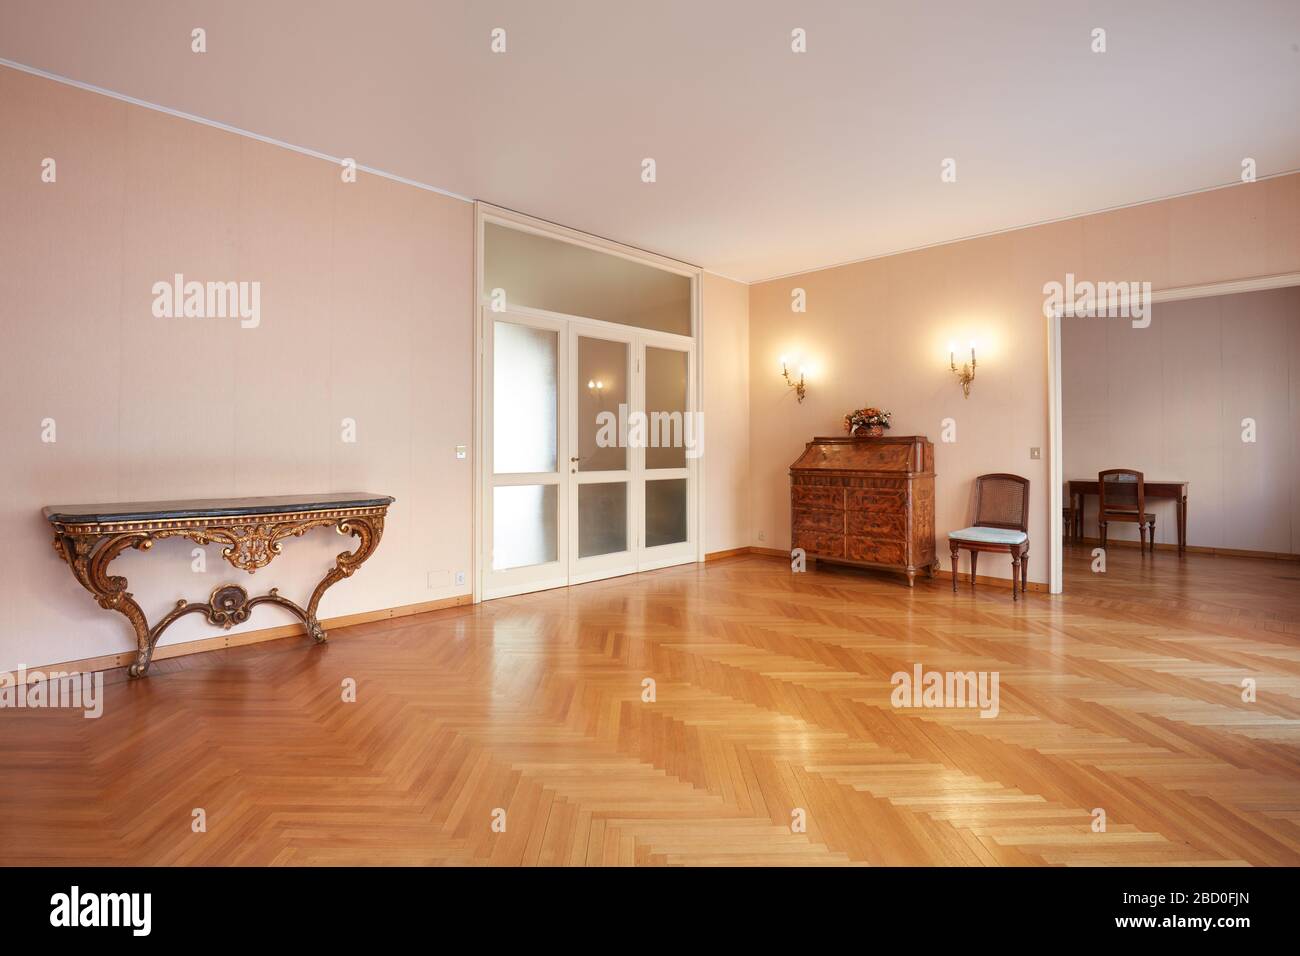 Large room with antiquities in apartment interior Stock Photo